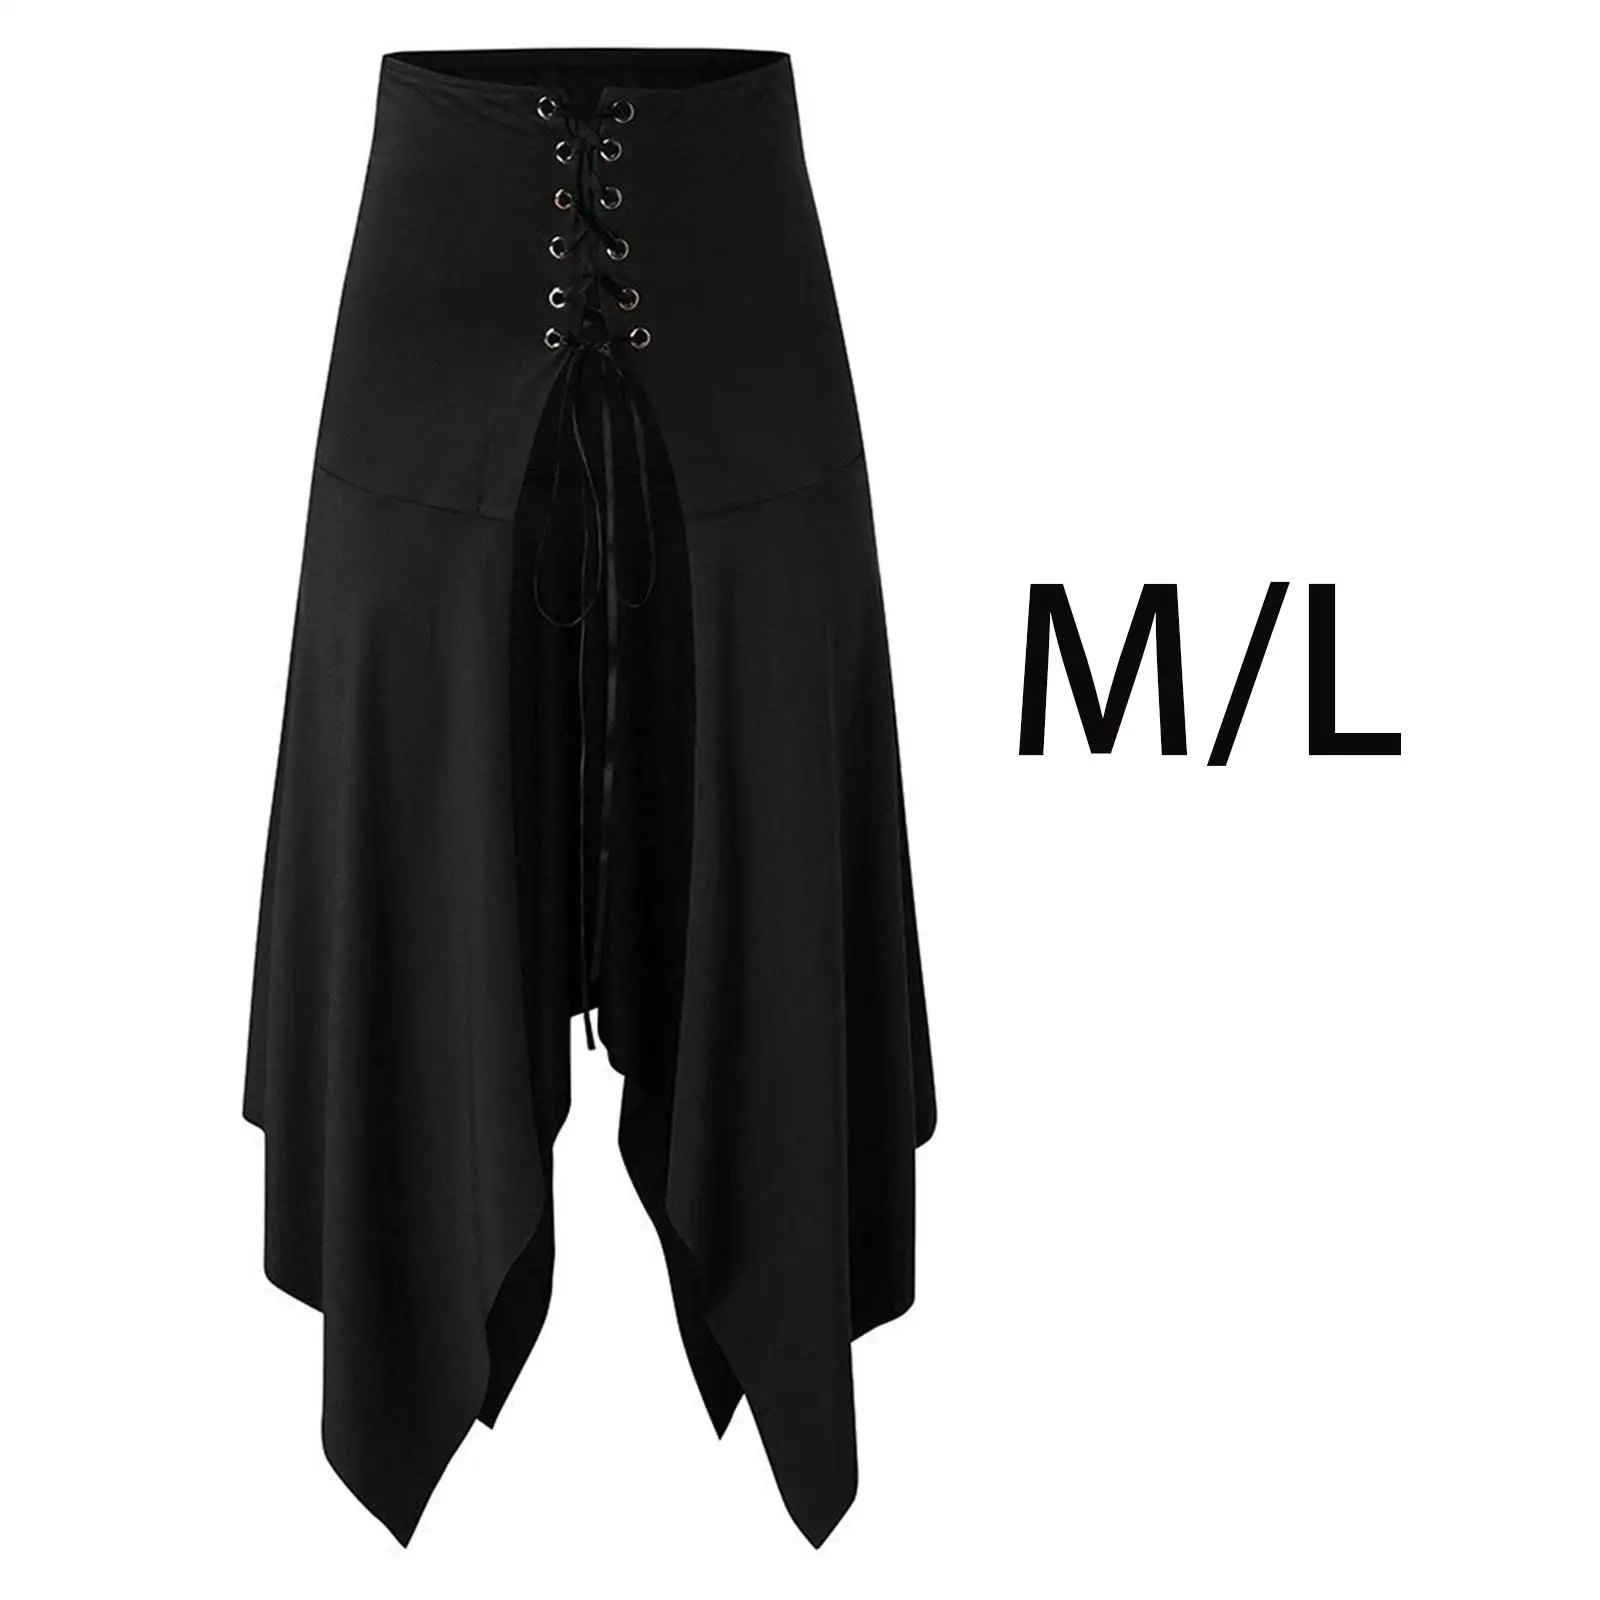 Womens Midi Skirt Gothic Punk Tulle Skirts Halloween Costume Accessory for Stage Performance Masquerade Festival Prom Dress up